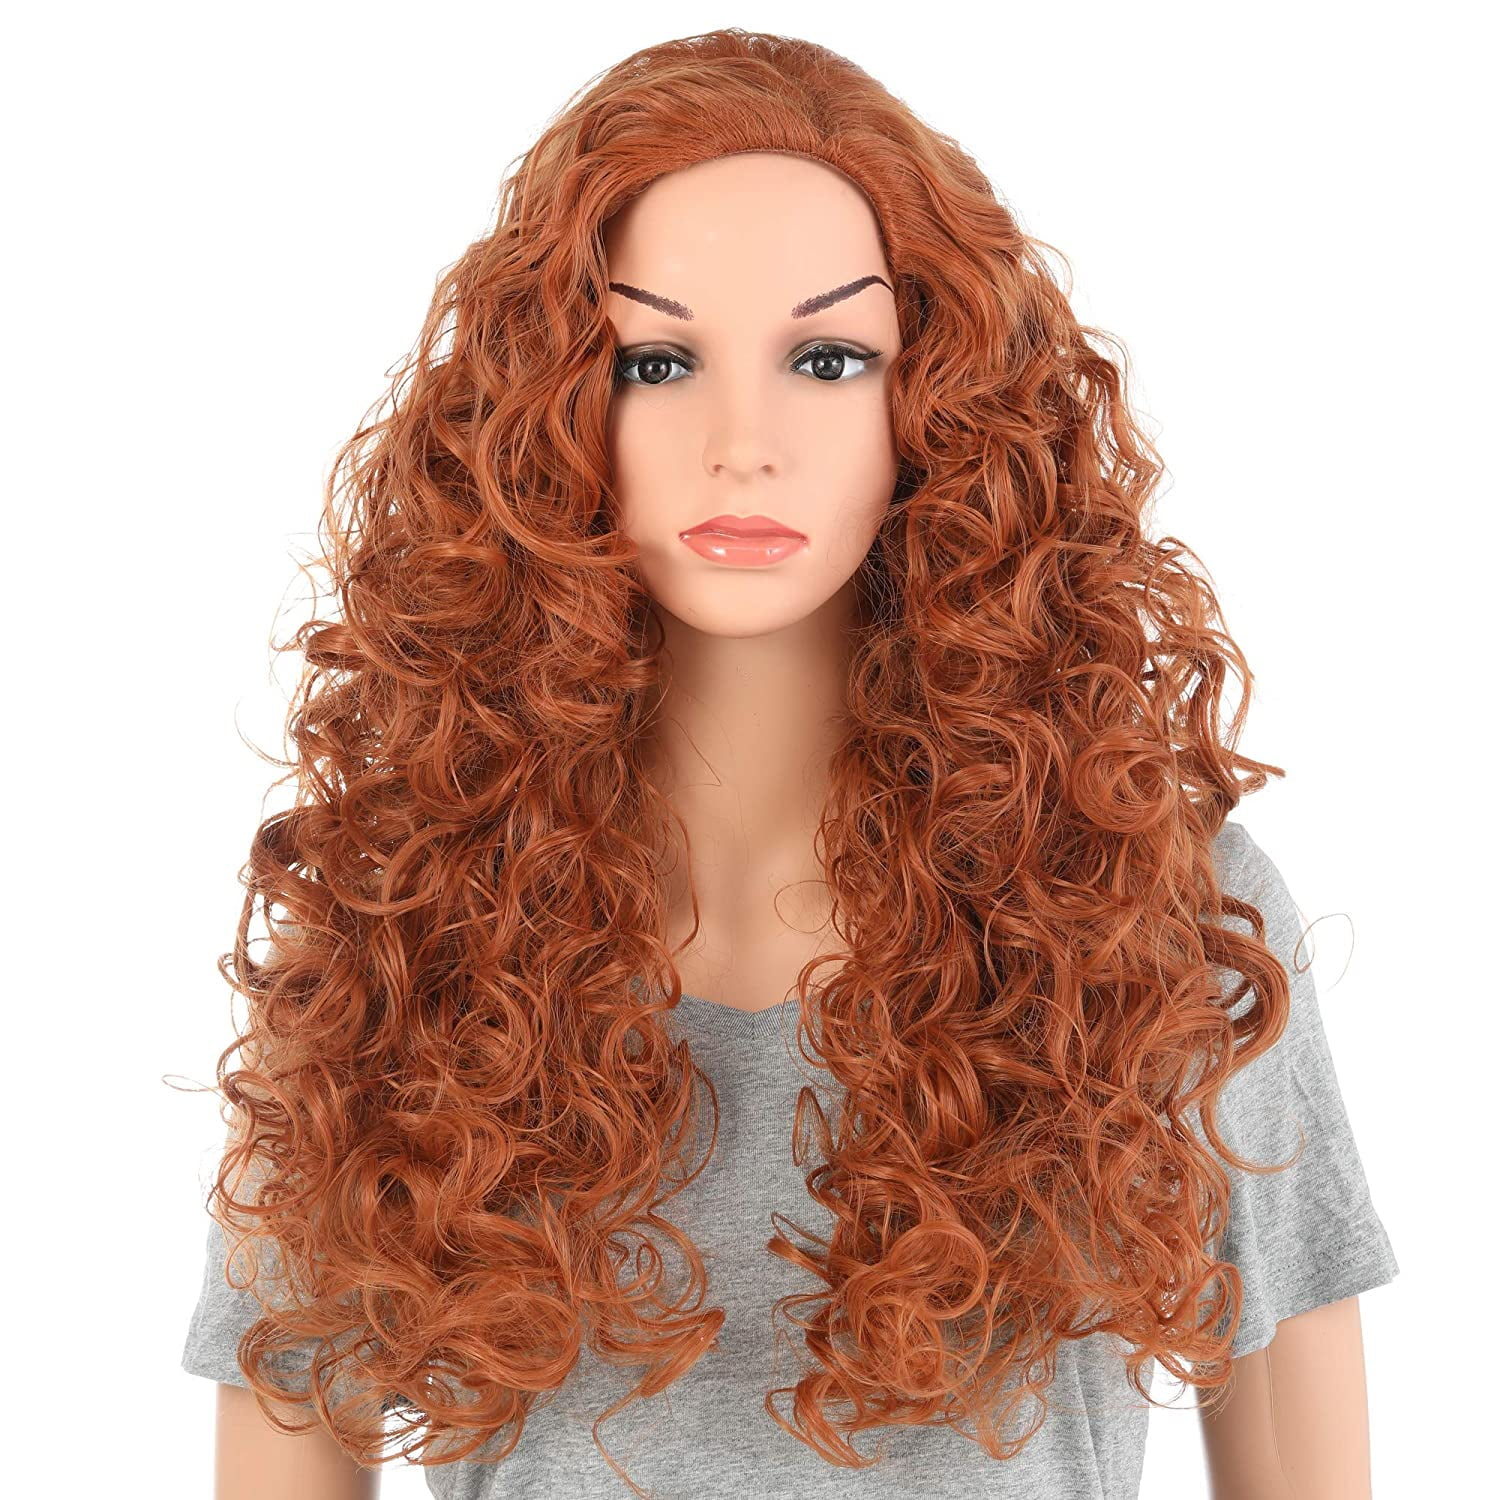 Onedor Long Hair Curly Wavy Full Head Halloween Wigs Cosplay Costume Party  Hairpiece (Fox Red) 